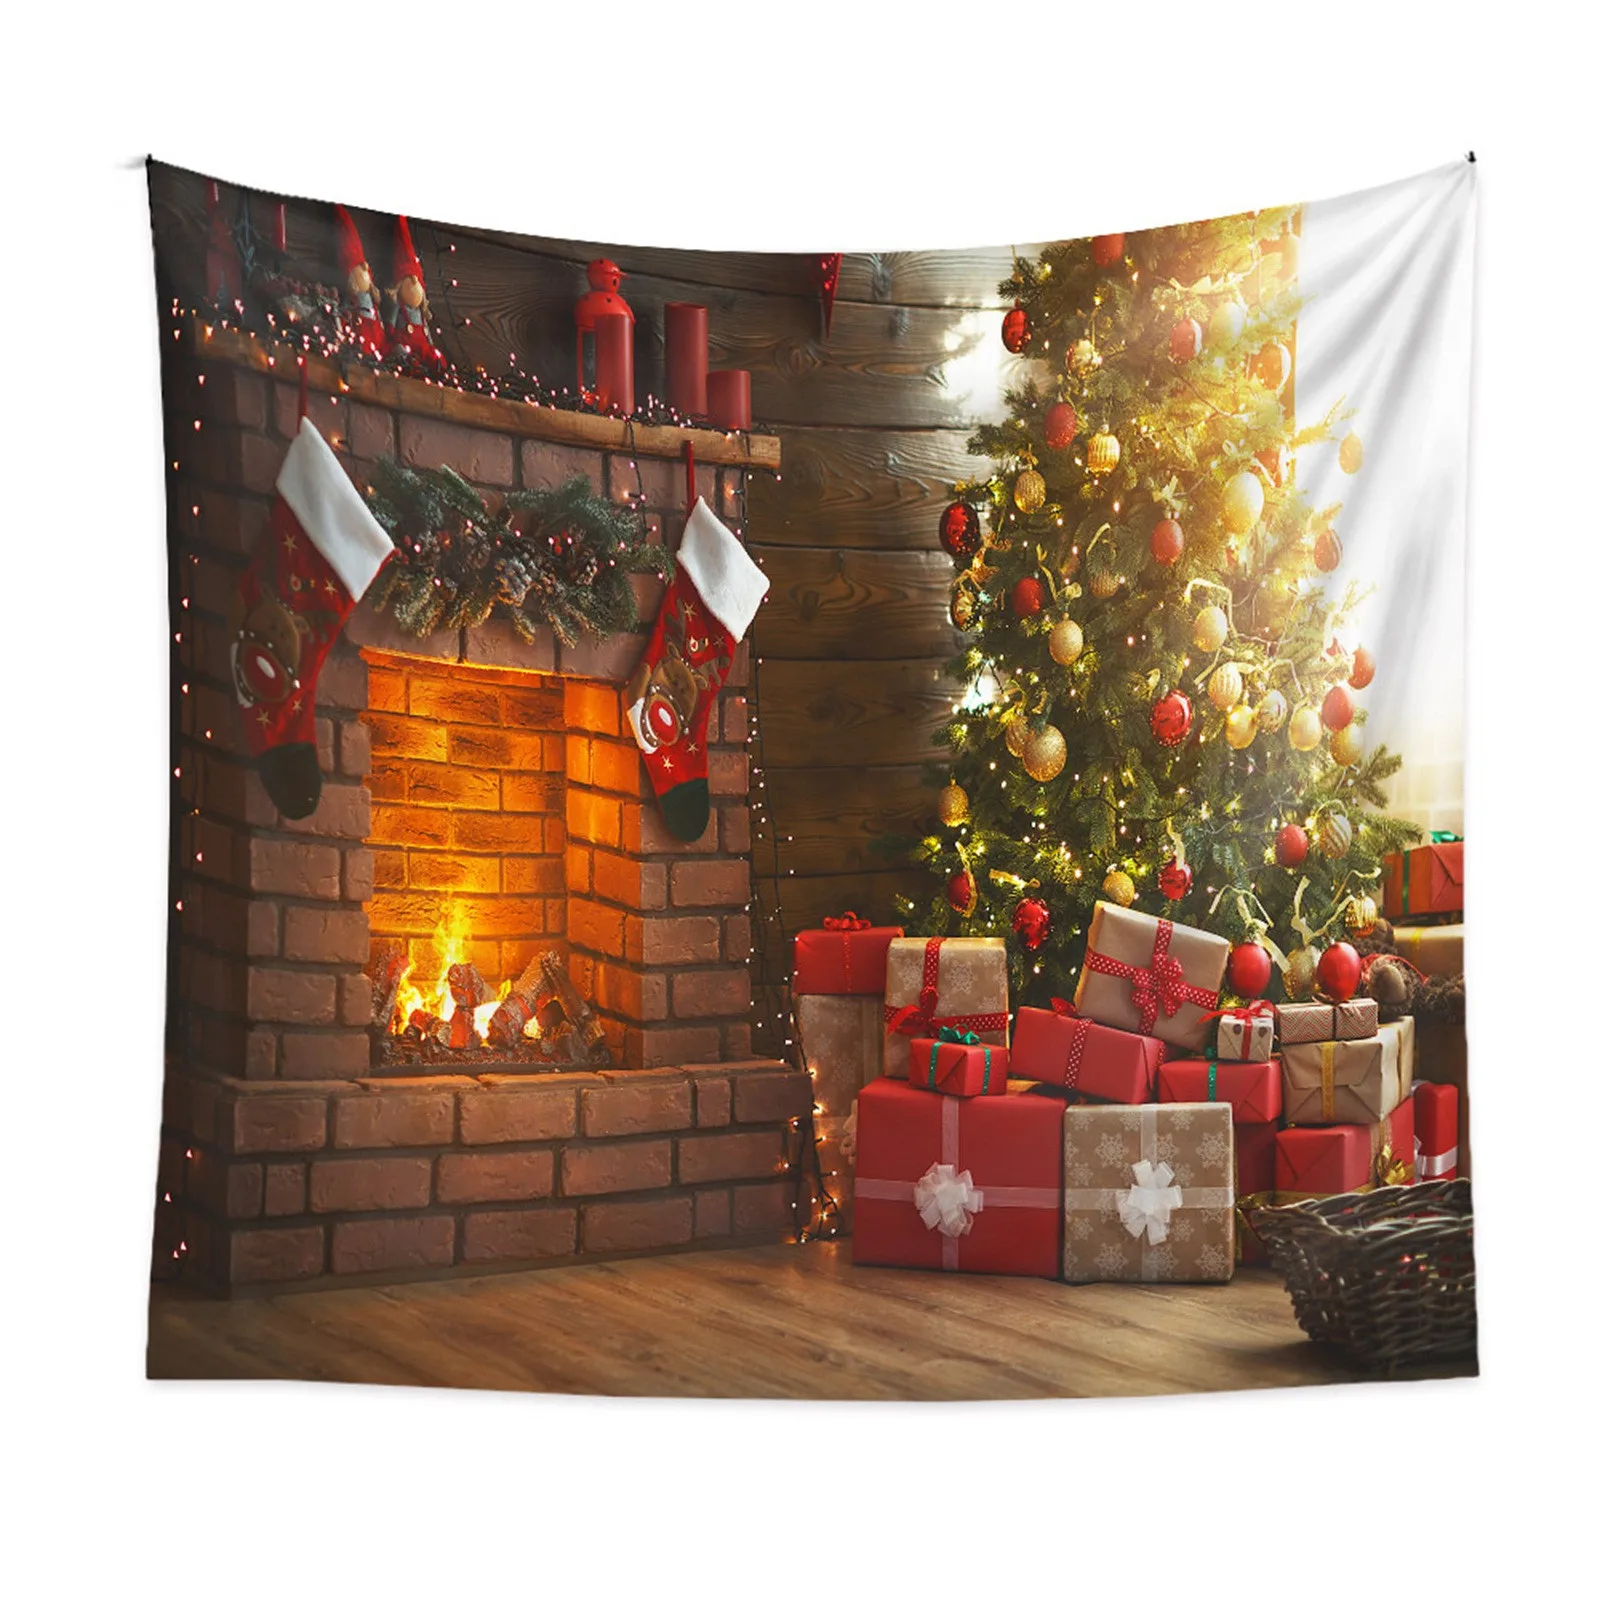 

Christmas Tapestry Wall Hanging Decor 70.9 X 90.6 Inches Chritmas Fireplace Tapestry Back-Drop For Home Decor Chritmas Tree Wall